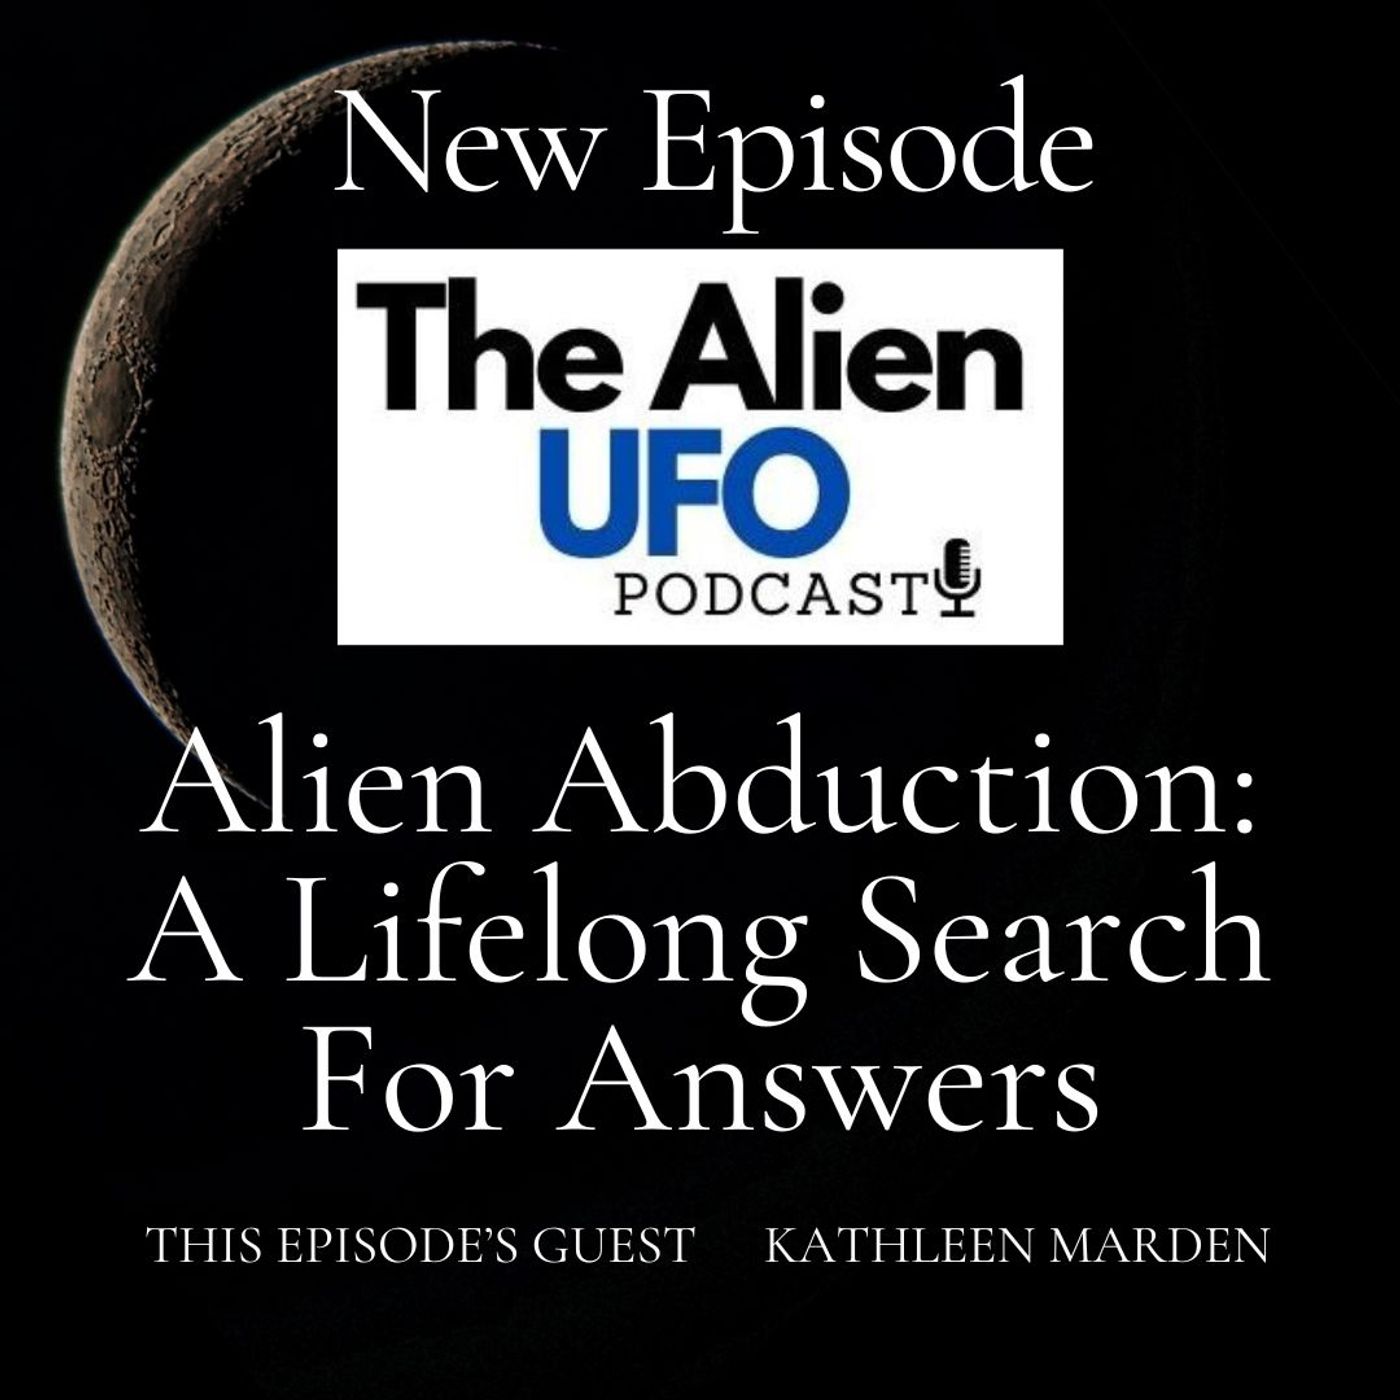 Alien Abduction: A Lifelong Search For Answers